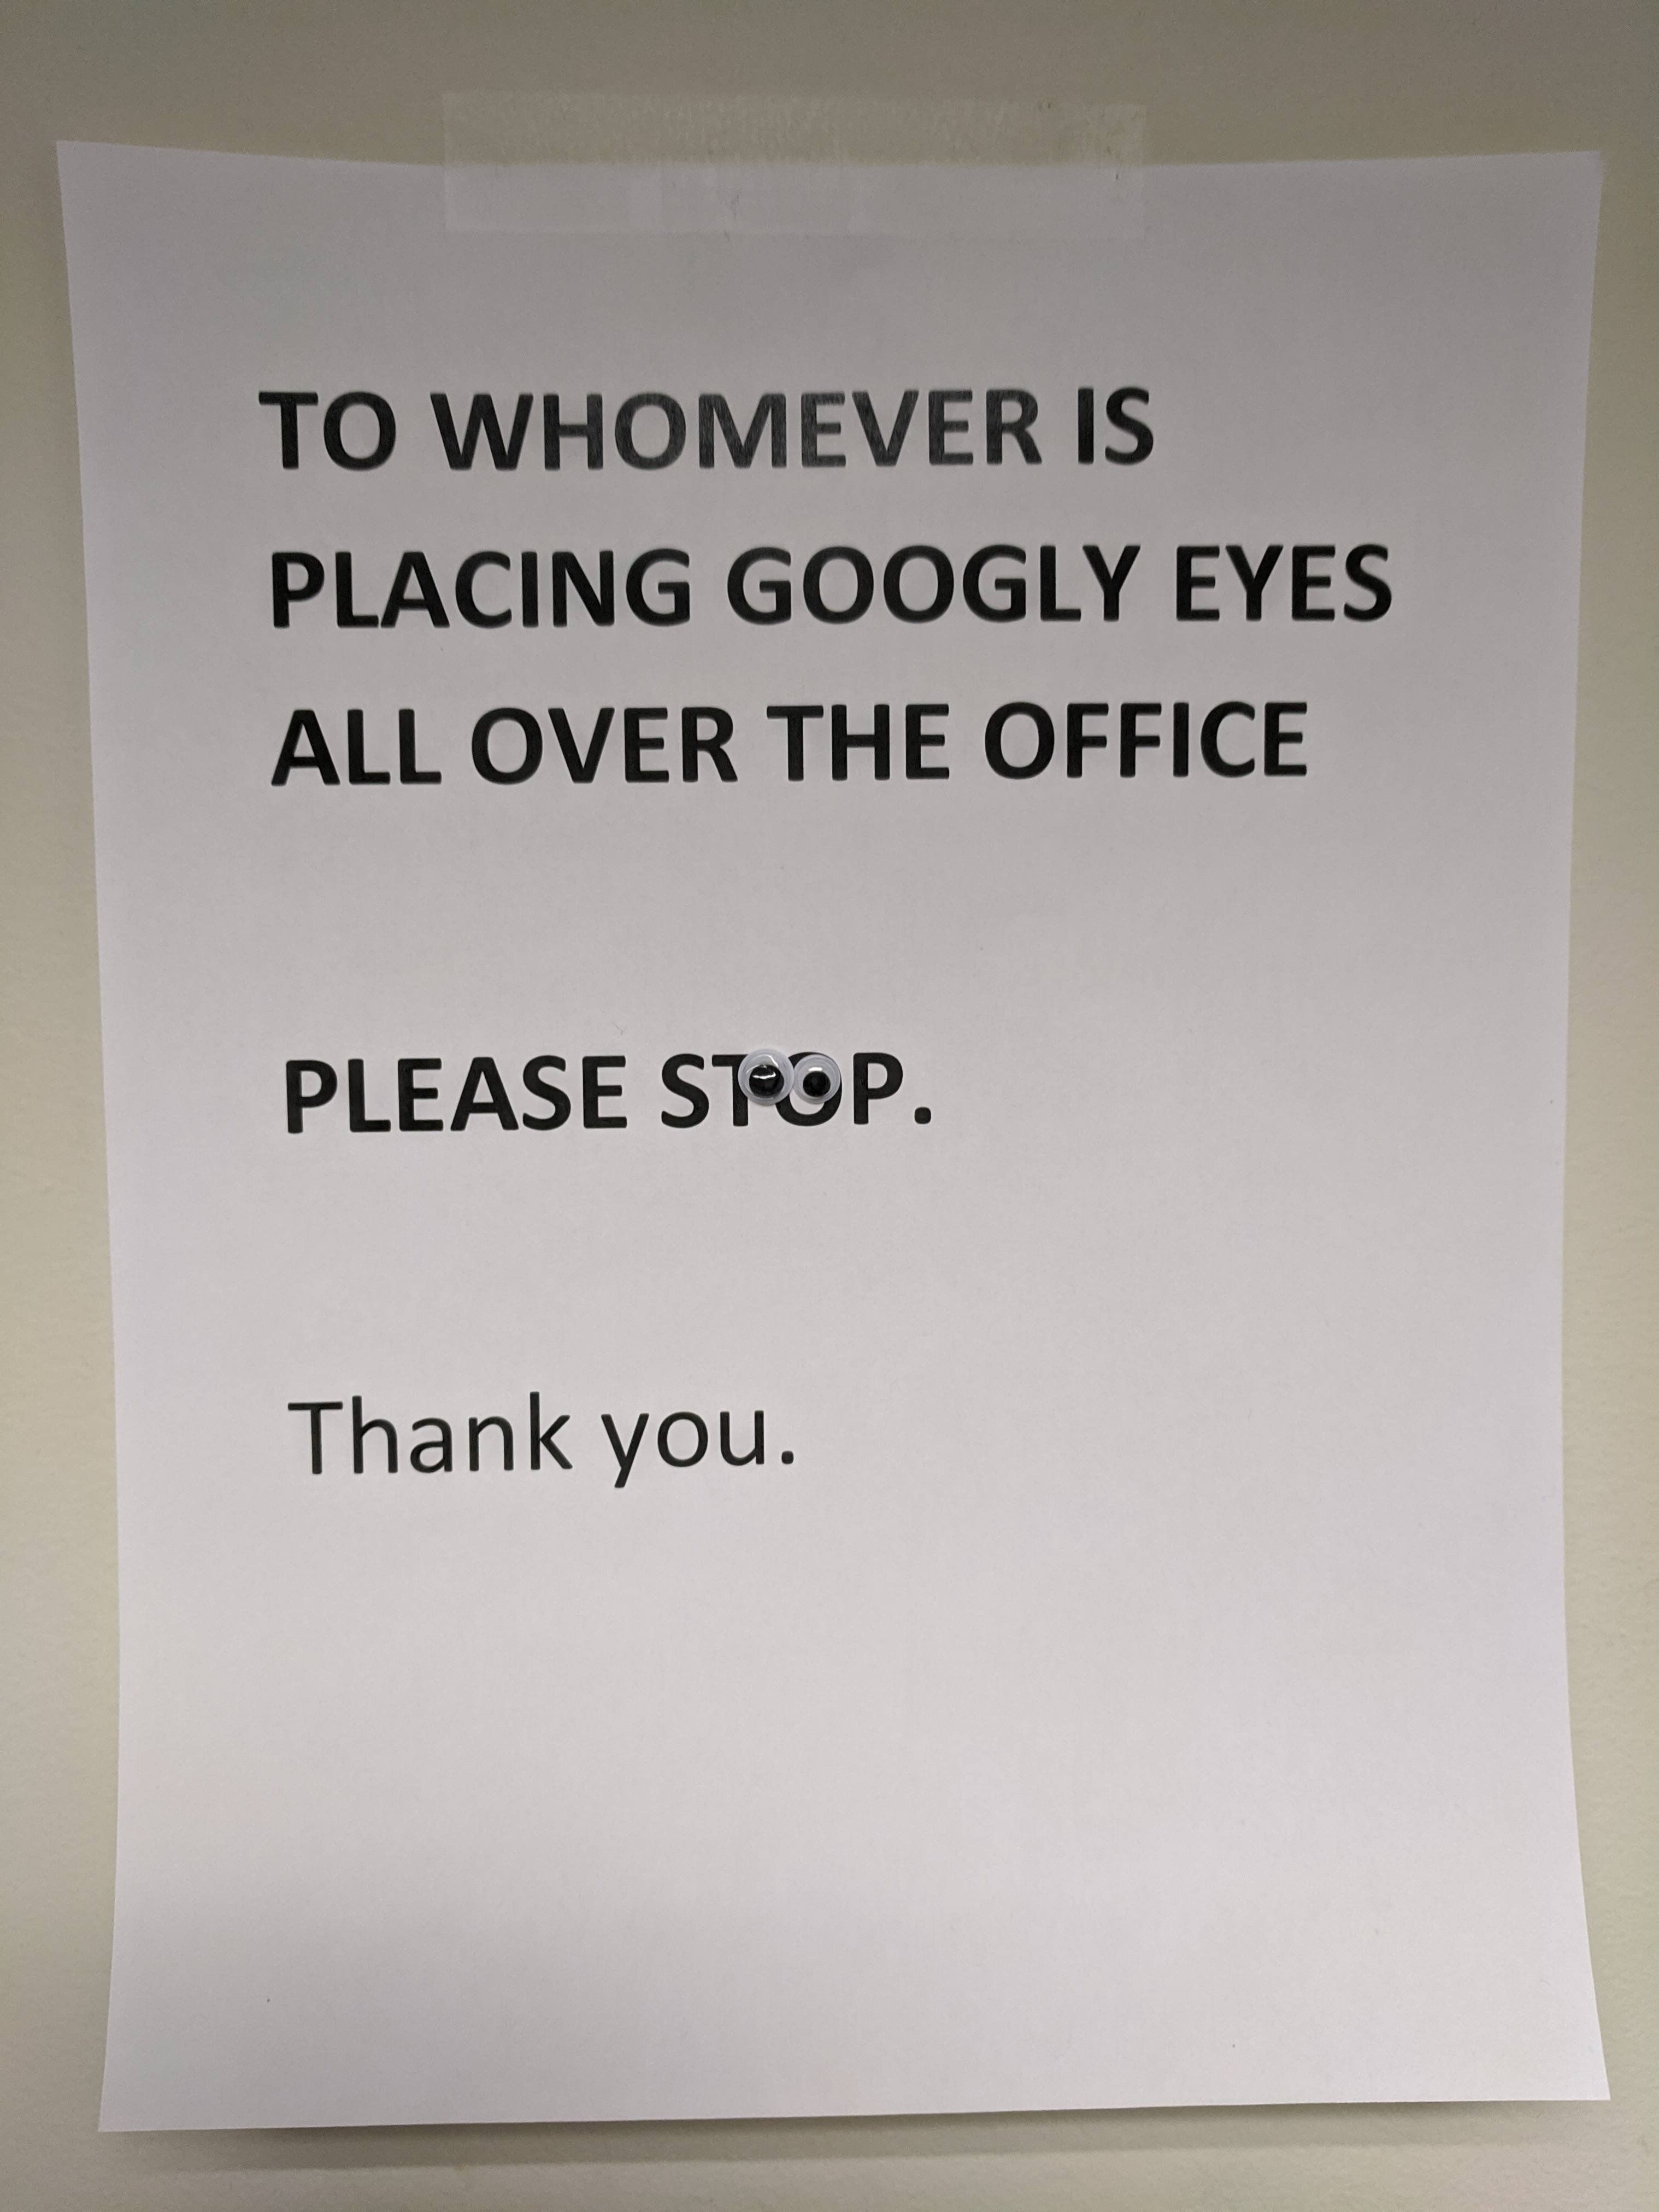 You can't stop the googly